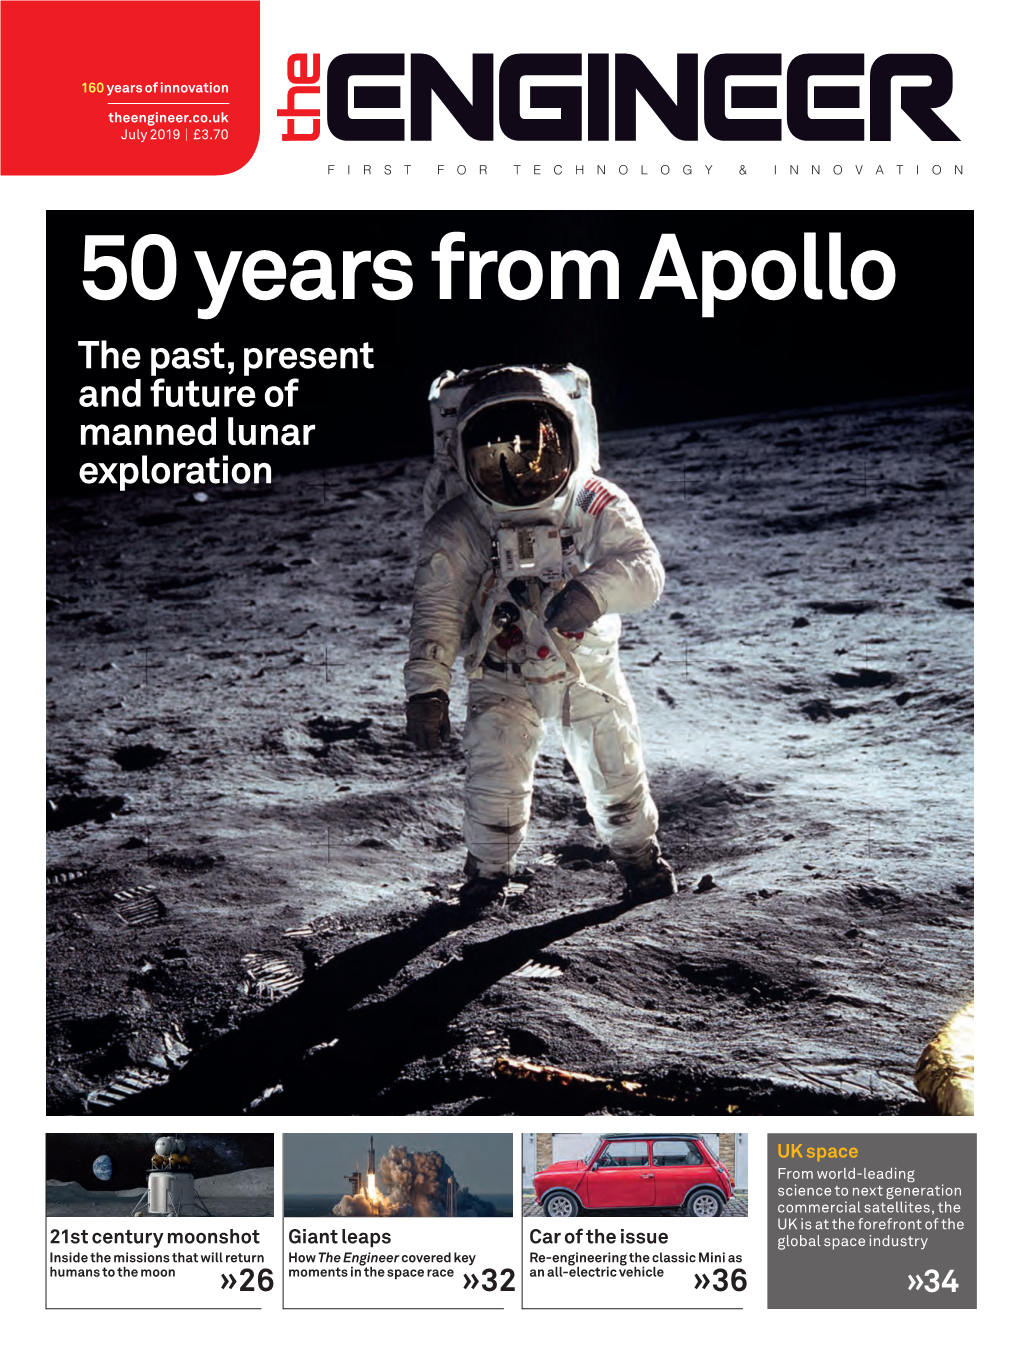 50 Years from Apollo the Past, Present and Future of Manned Lunar Exploration